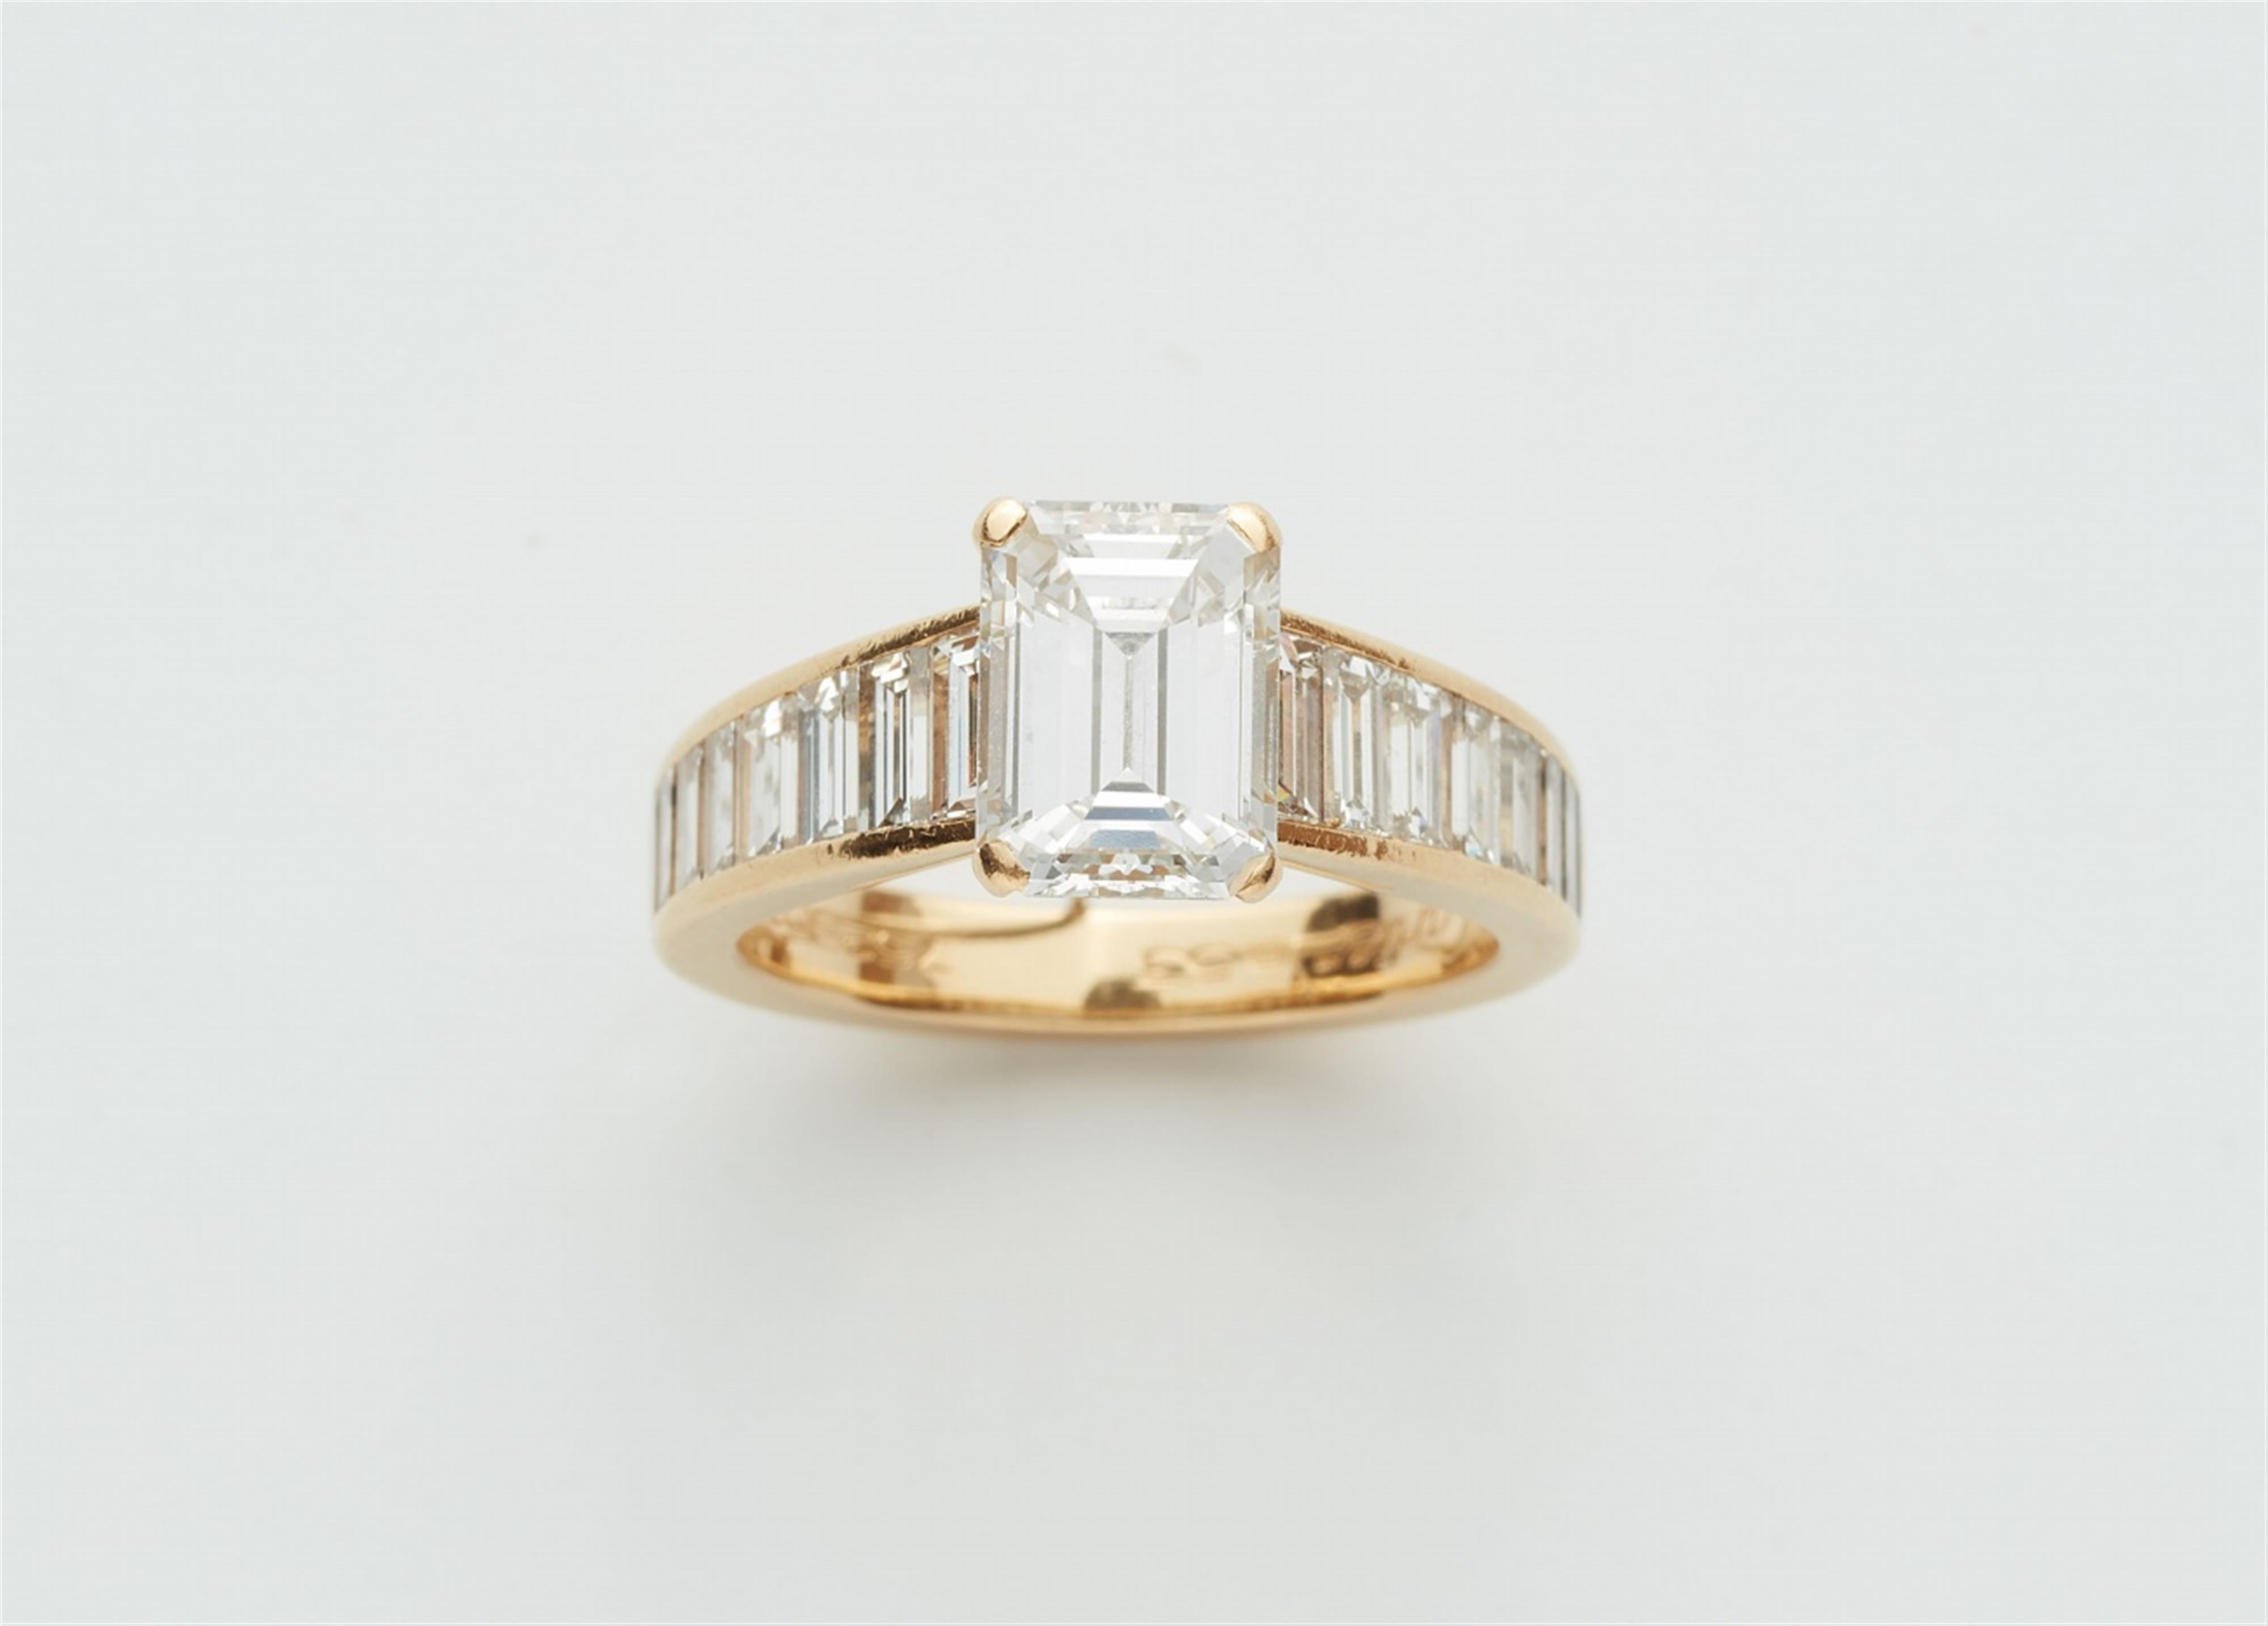 An 18k gold Cartier ring with an emerald-cut diamond solitaire - image-1